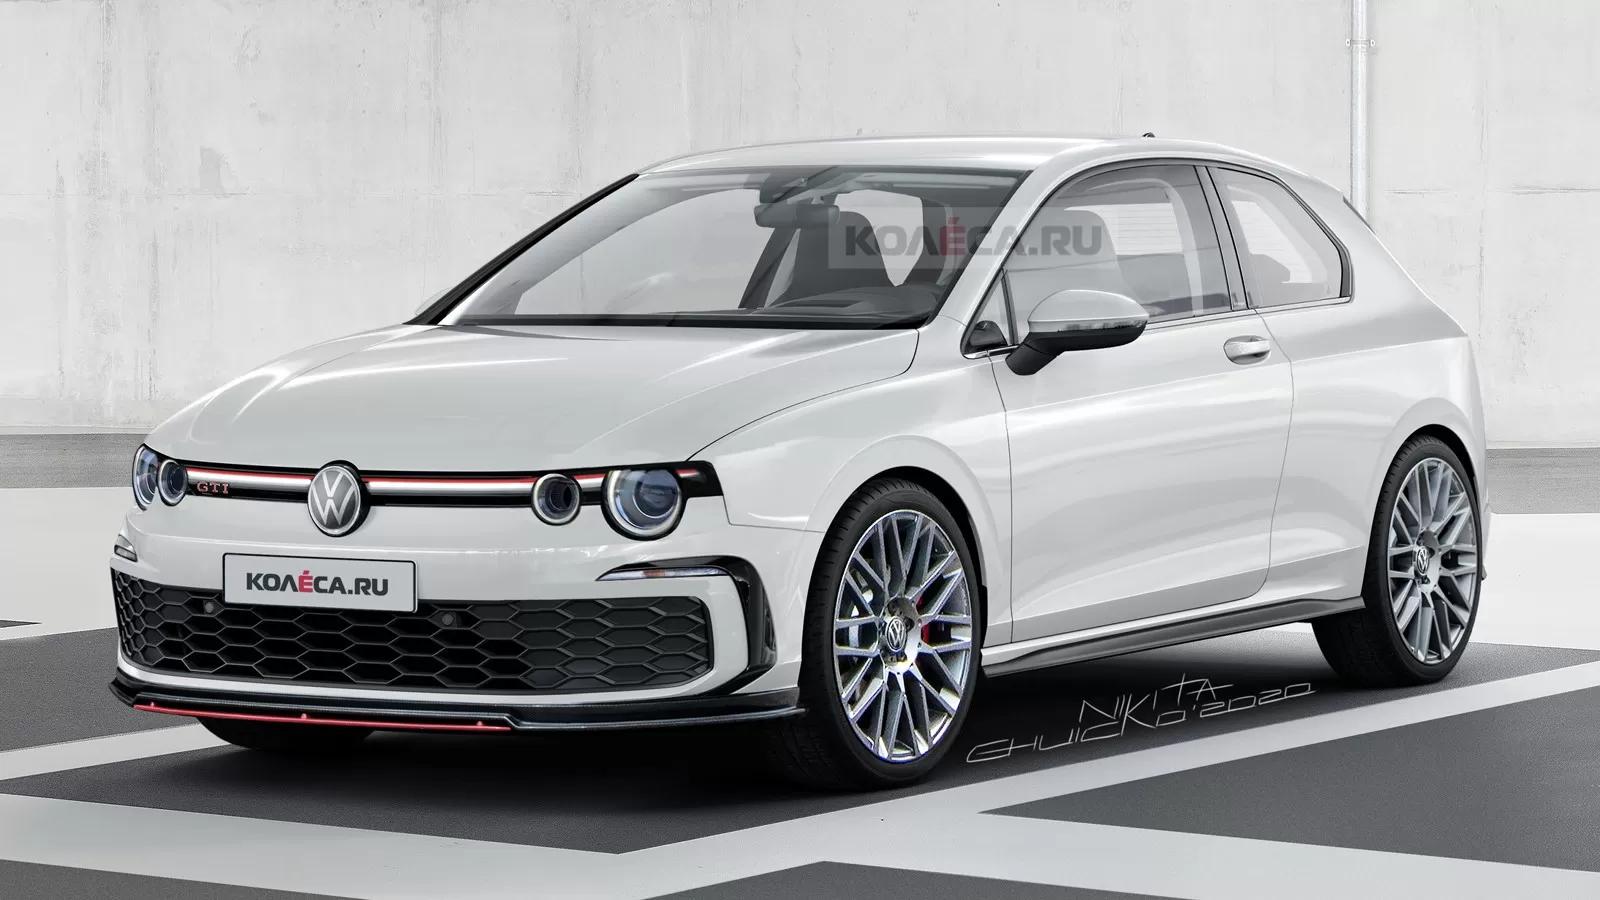 Dressing The 2021 VW Golf GTI Mk8 With Retro Cues Might Not Be The Best  Idea